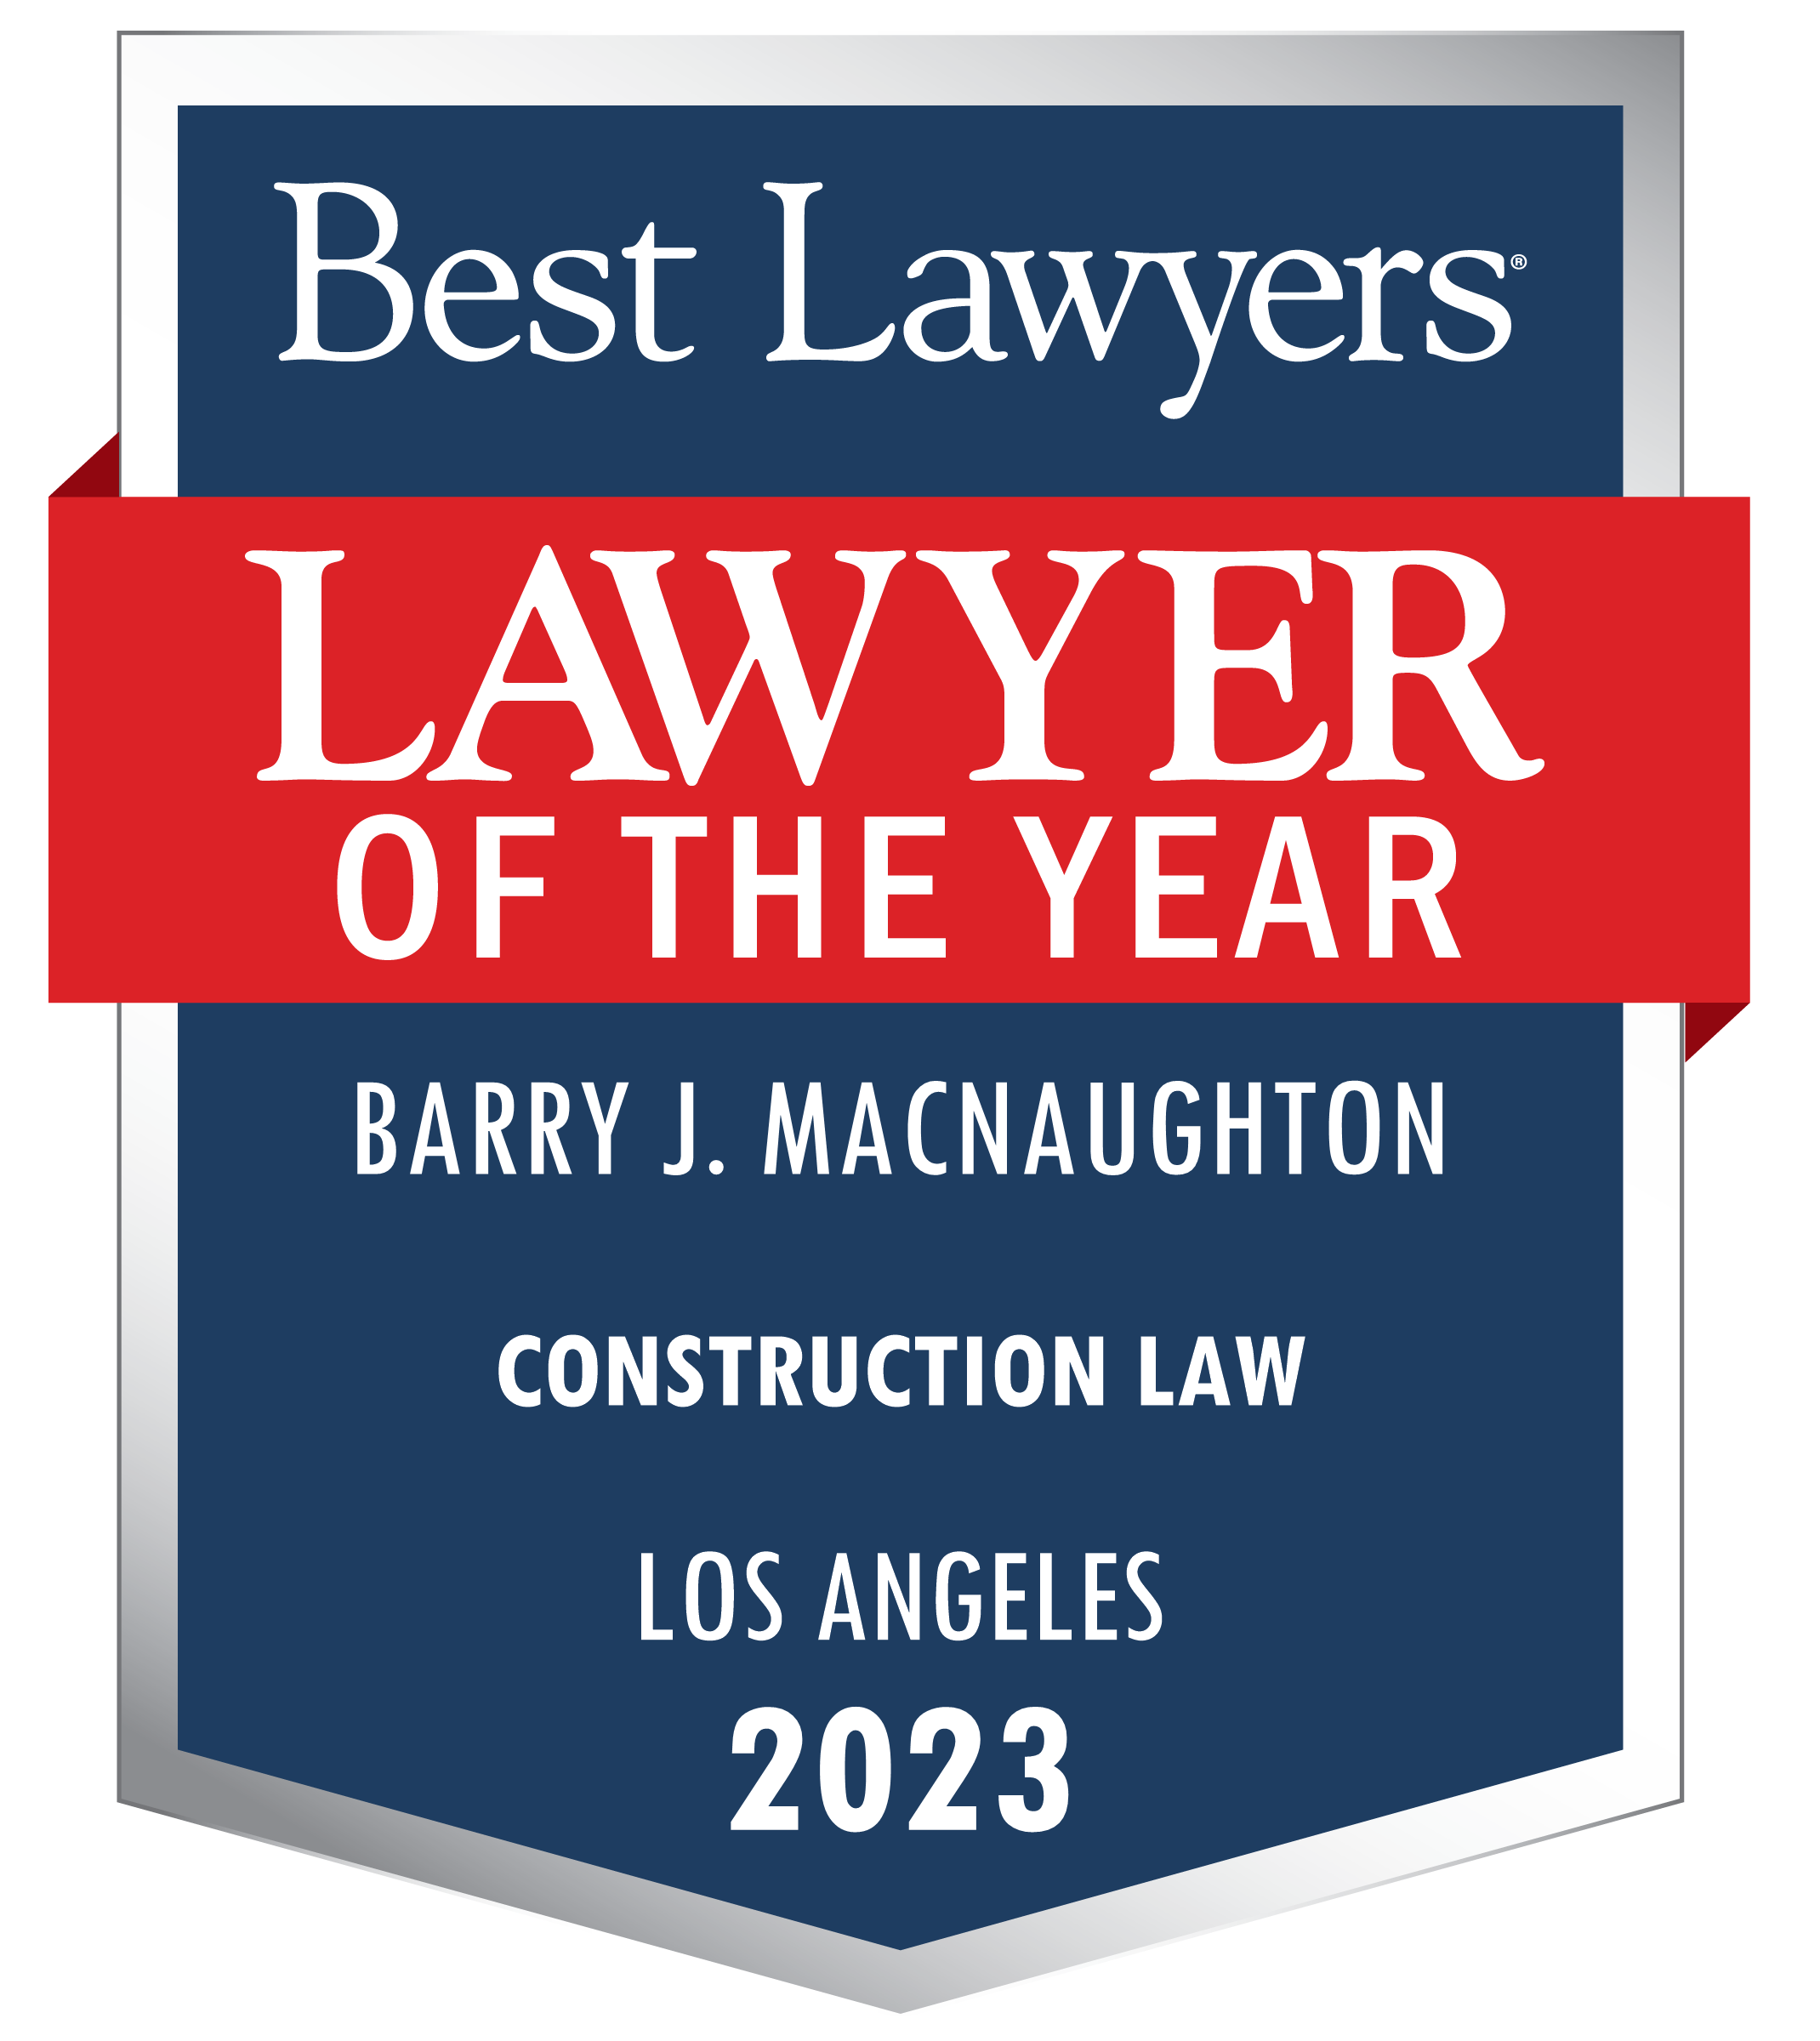 Best Lawyers - _Lawyer of the Year